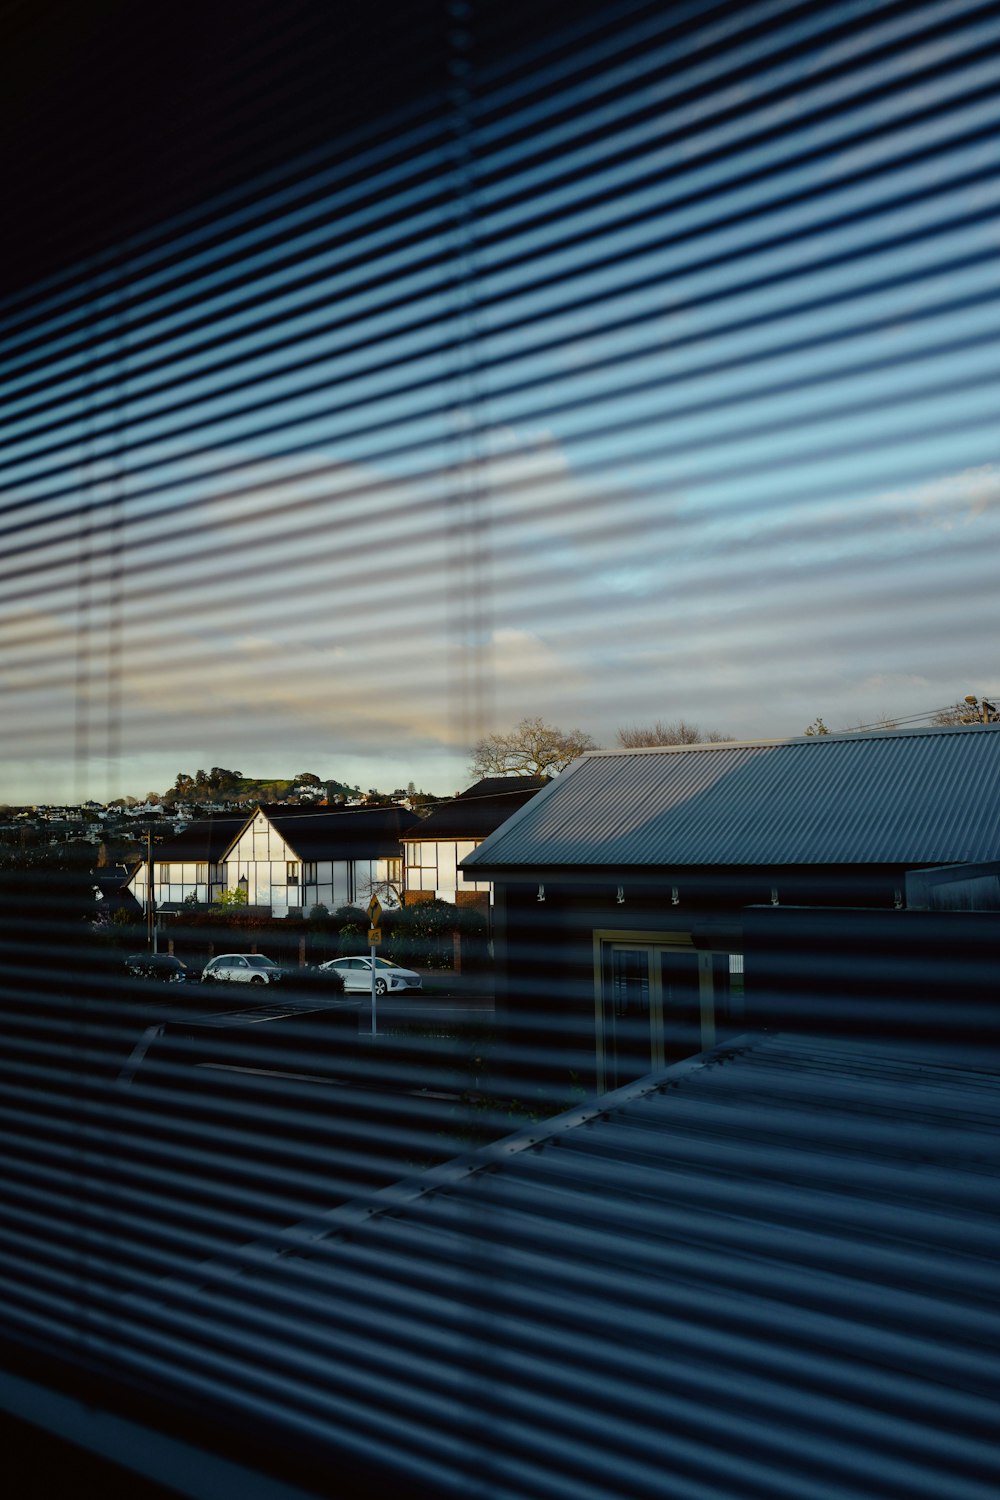 a view of a parking lot through a window